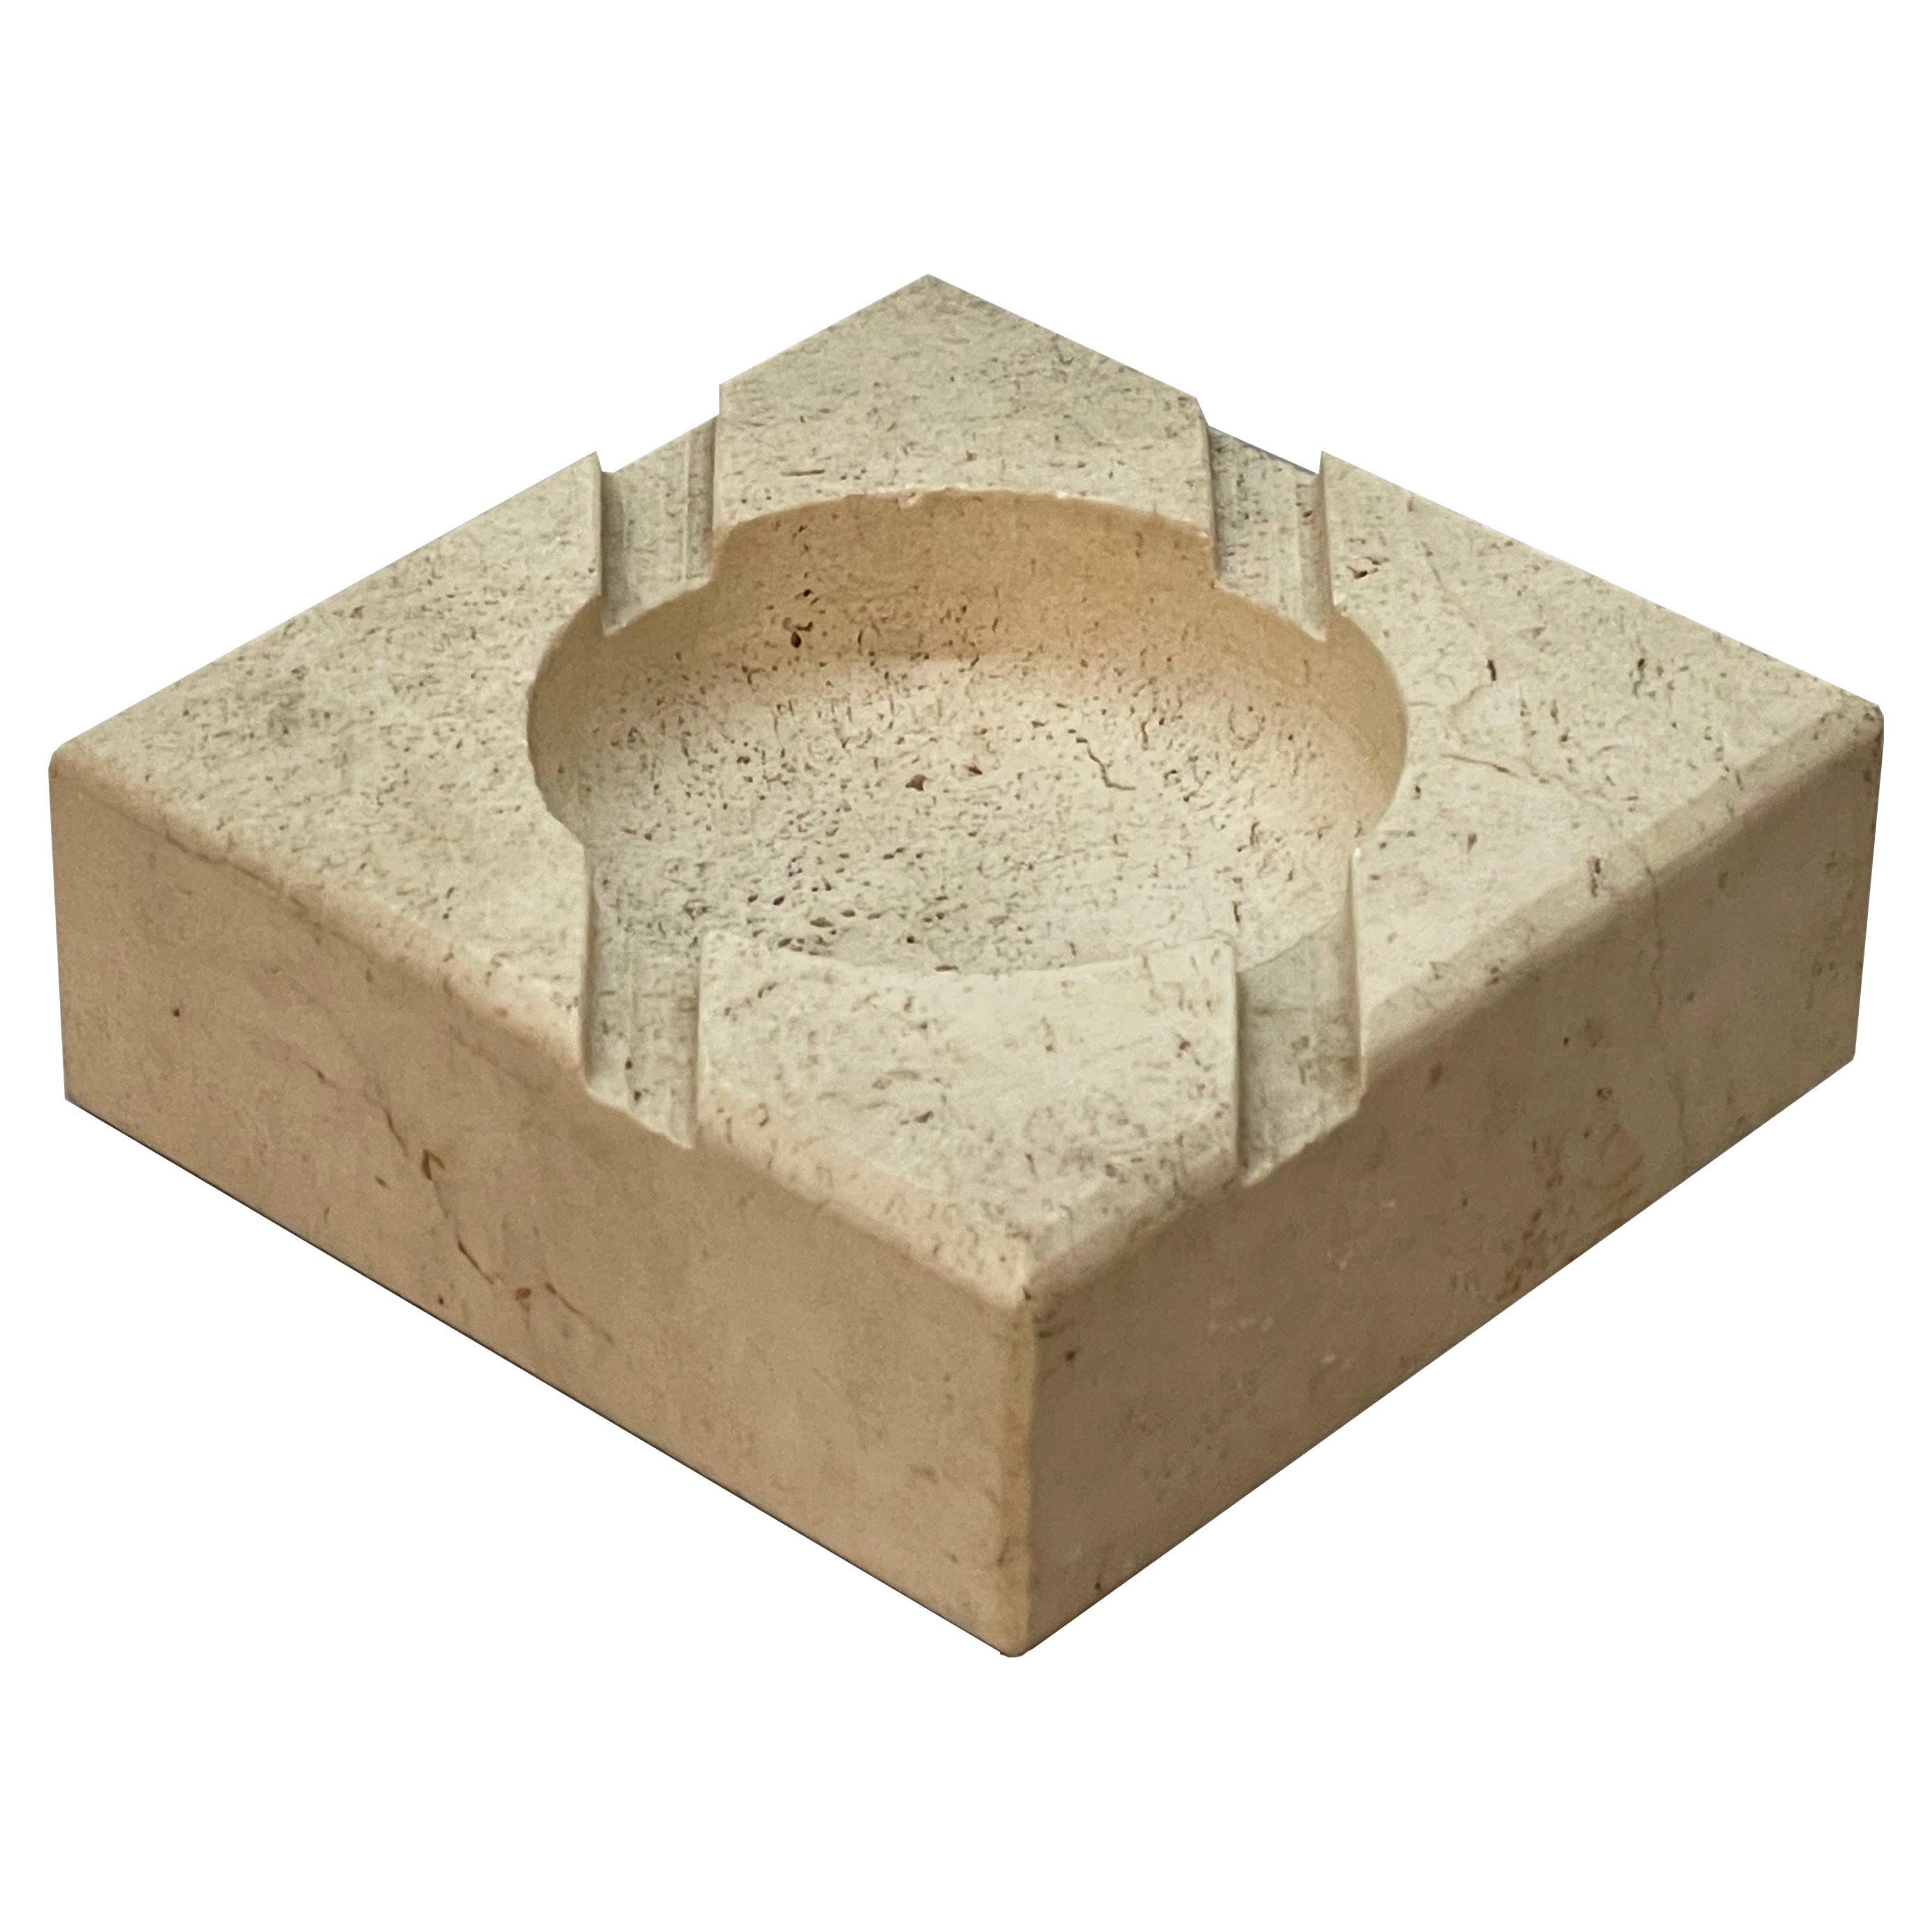 Midcentury Squared White Travertine Marble Italian Ashtray After Mannelli, 1970s For Sale